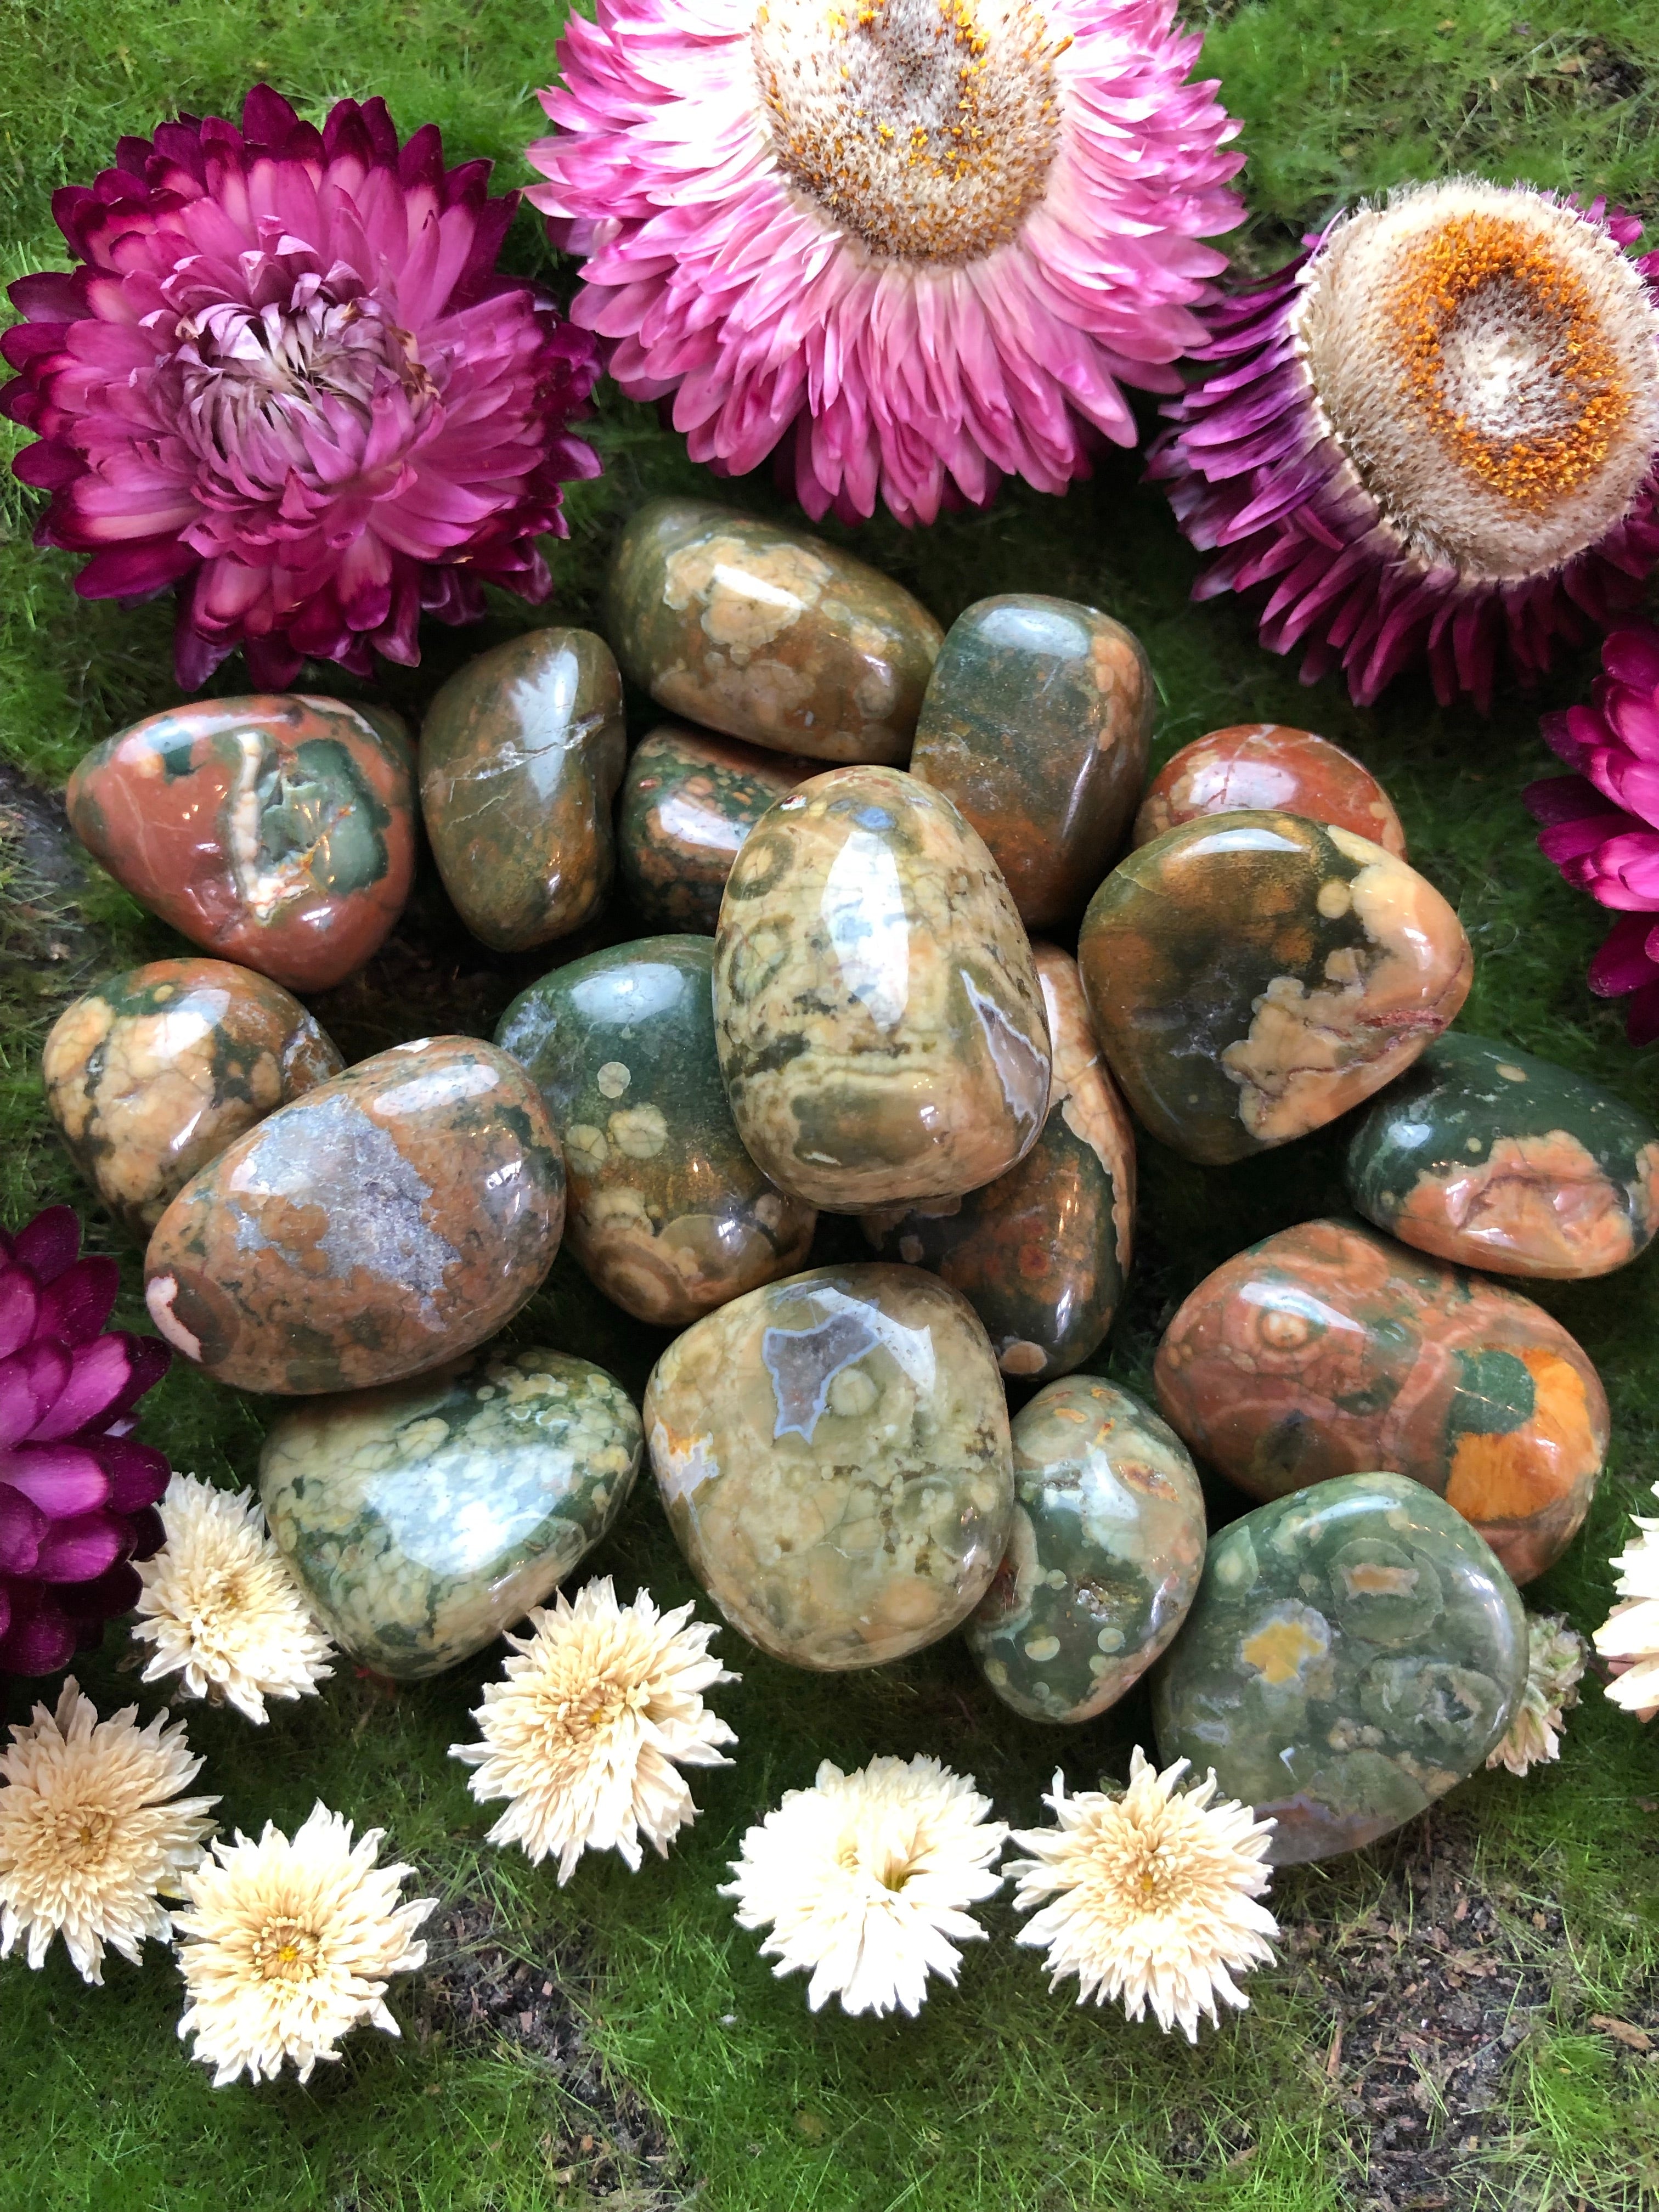 Rhyolite Tumbled Stone For a Positive Perspective